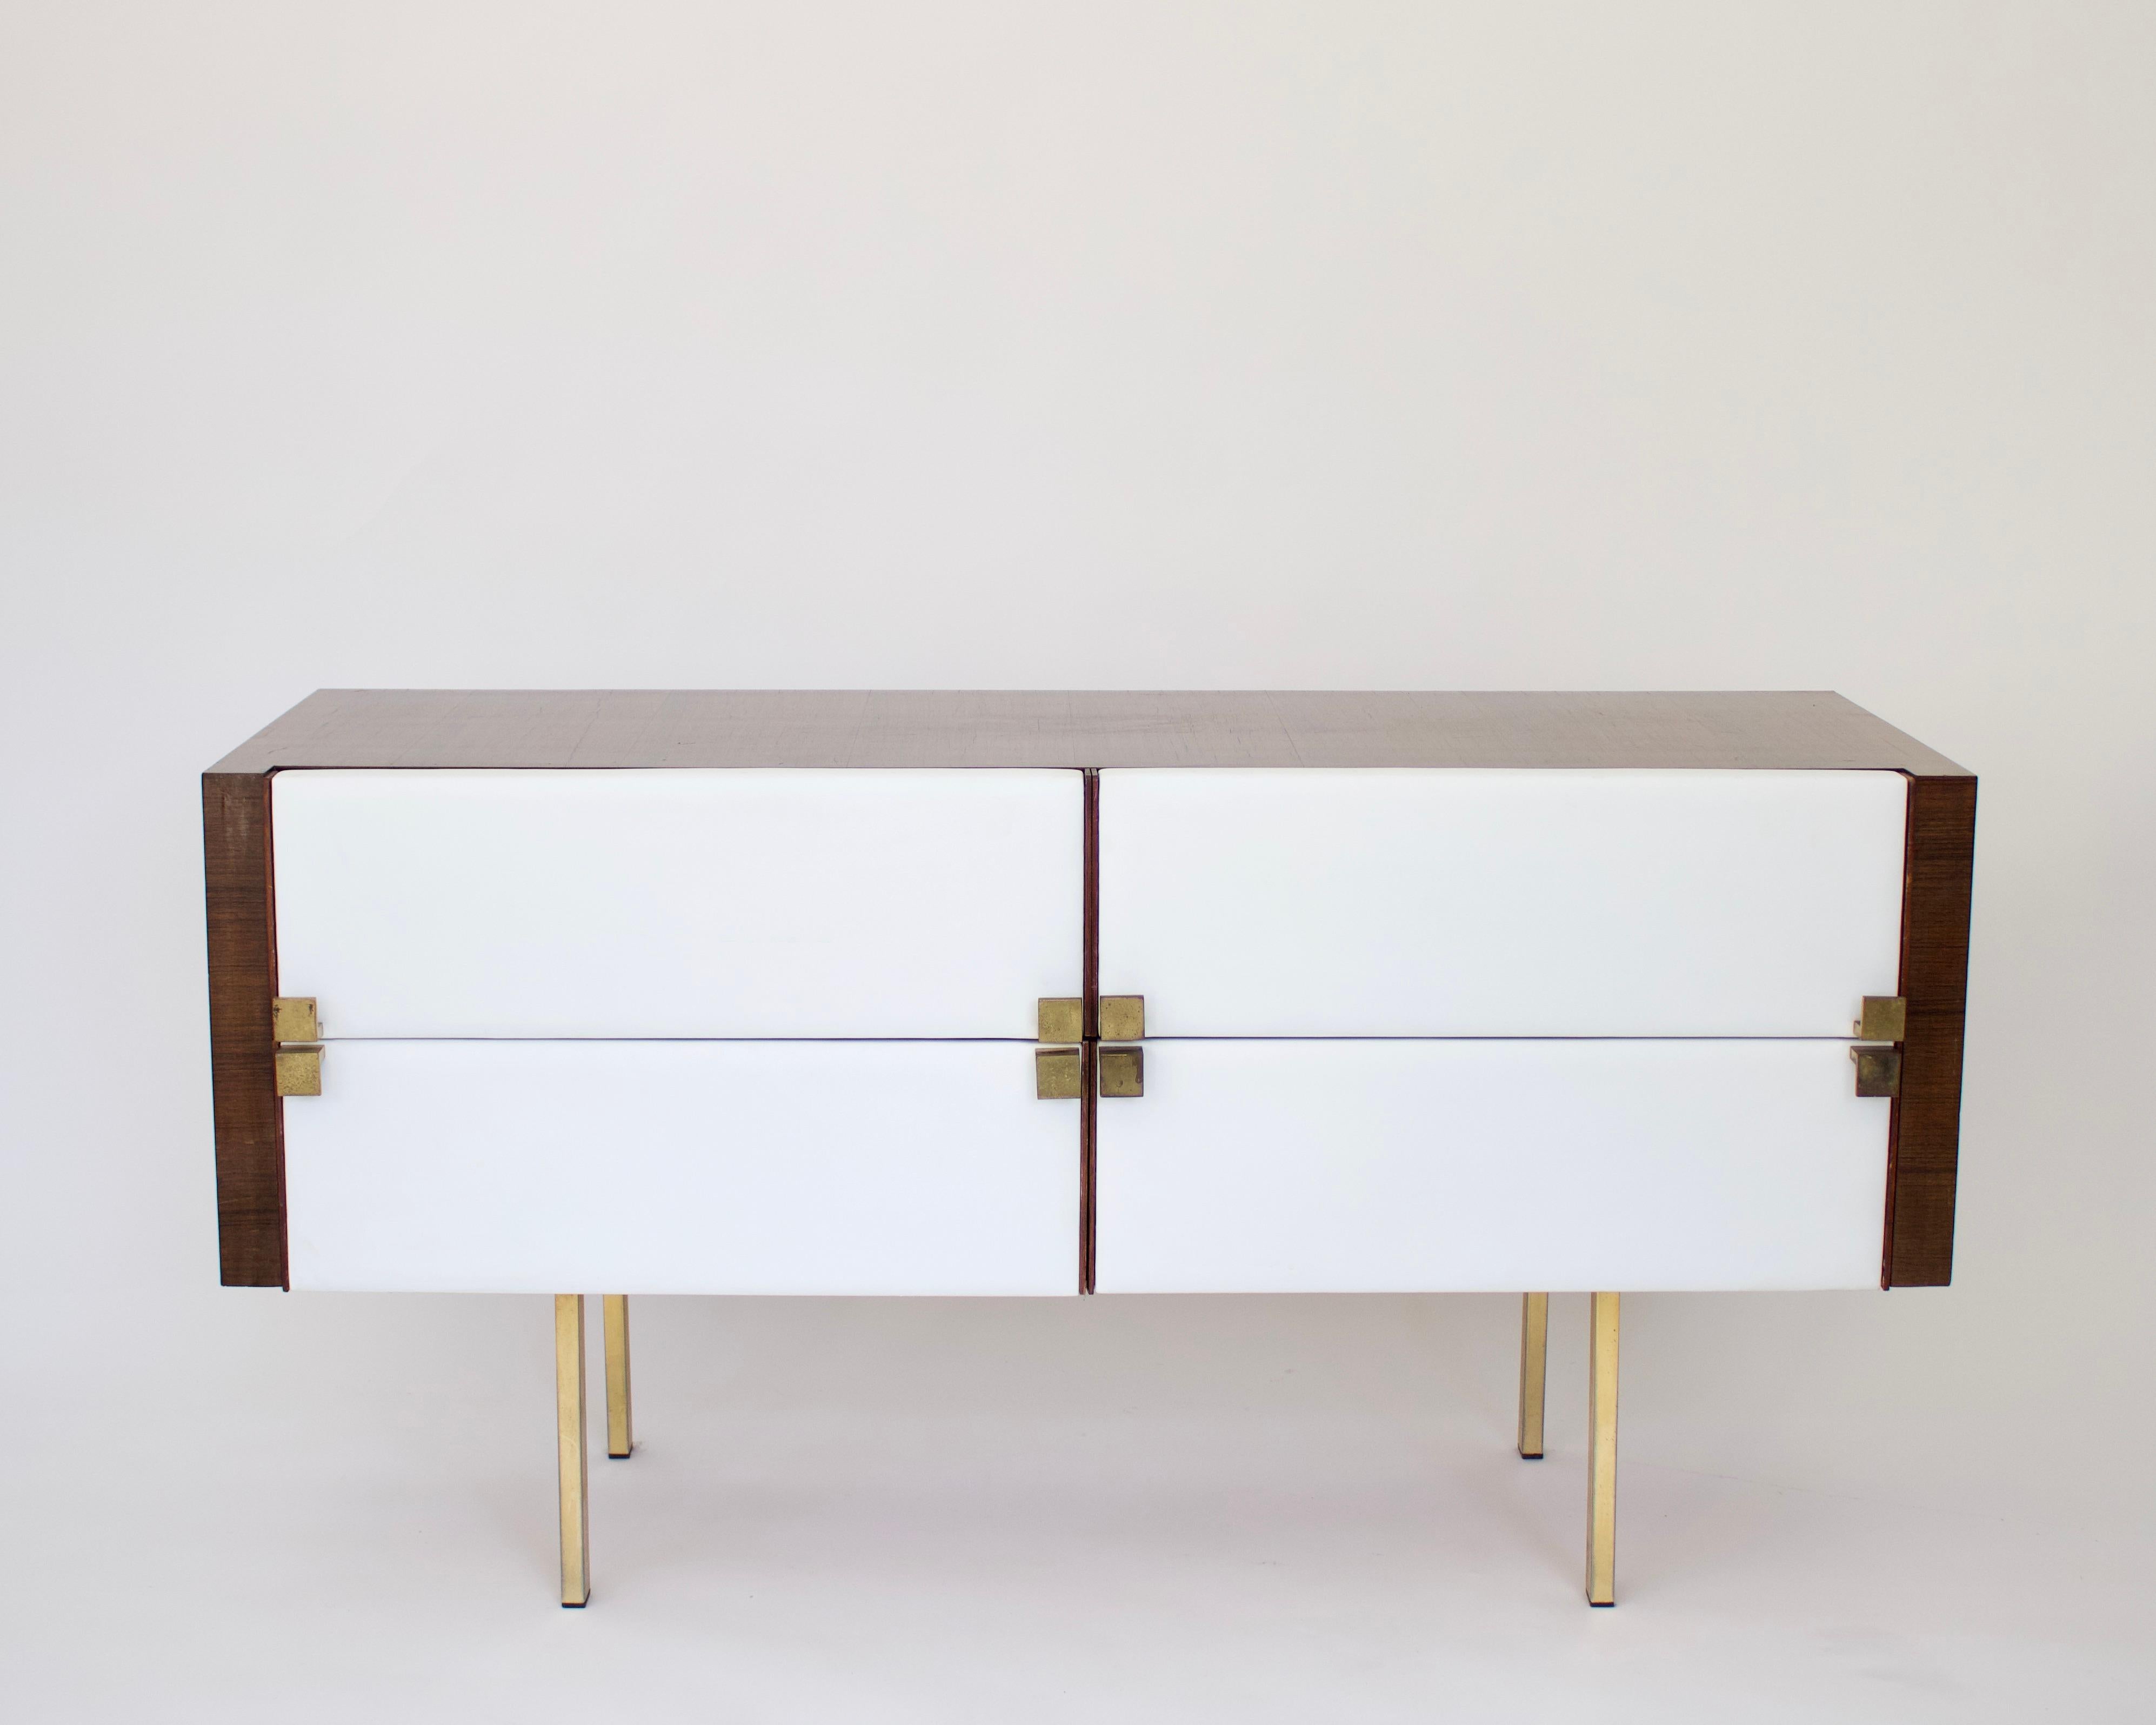 A French modernist cabinet vanity dresser or dressing table by Roger Landault featuring a body in mahogany with brass legs and bronze pulls with upholstered fronts done in a white leather.
The cabinet also features three drawers as well as one faux